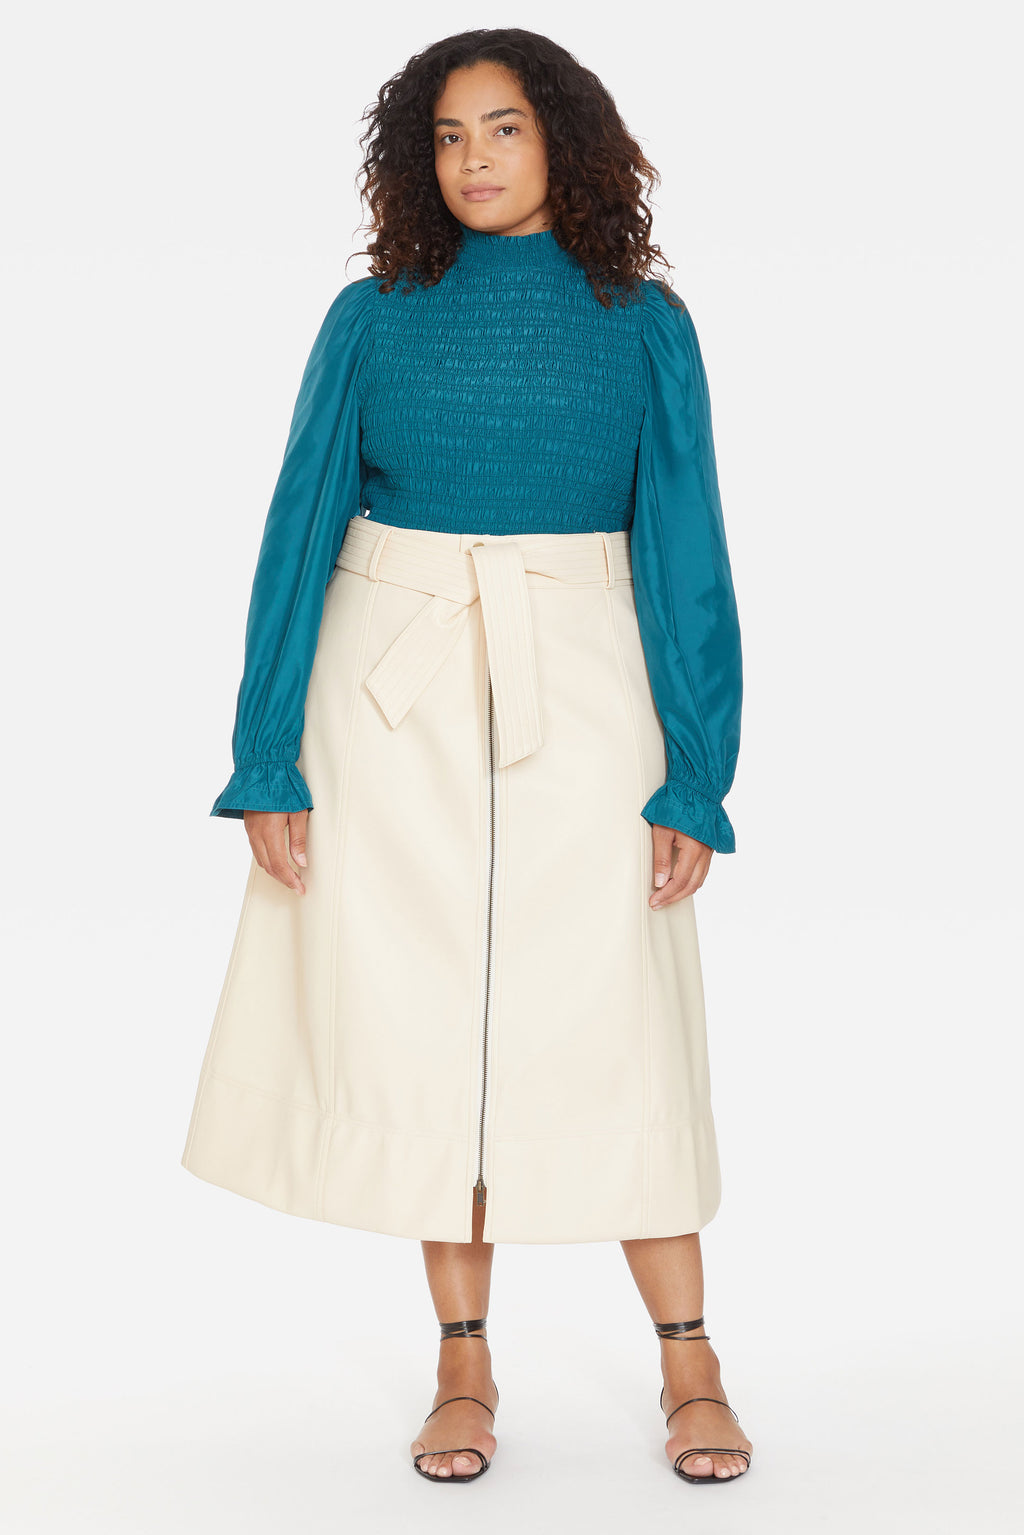 Sand midi a-line skirt with zipper and tie belt